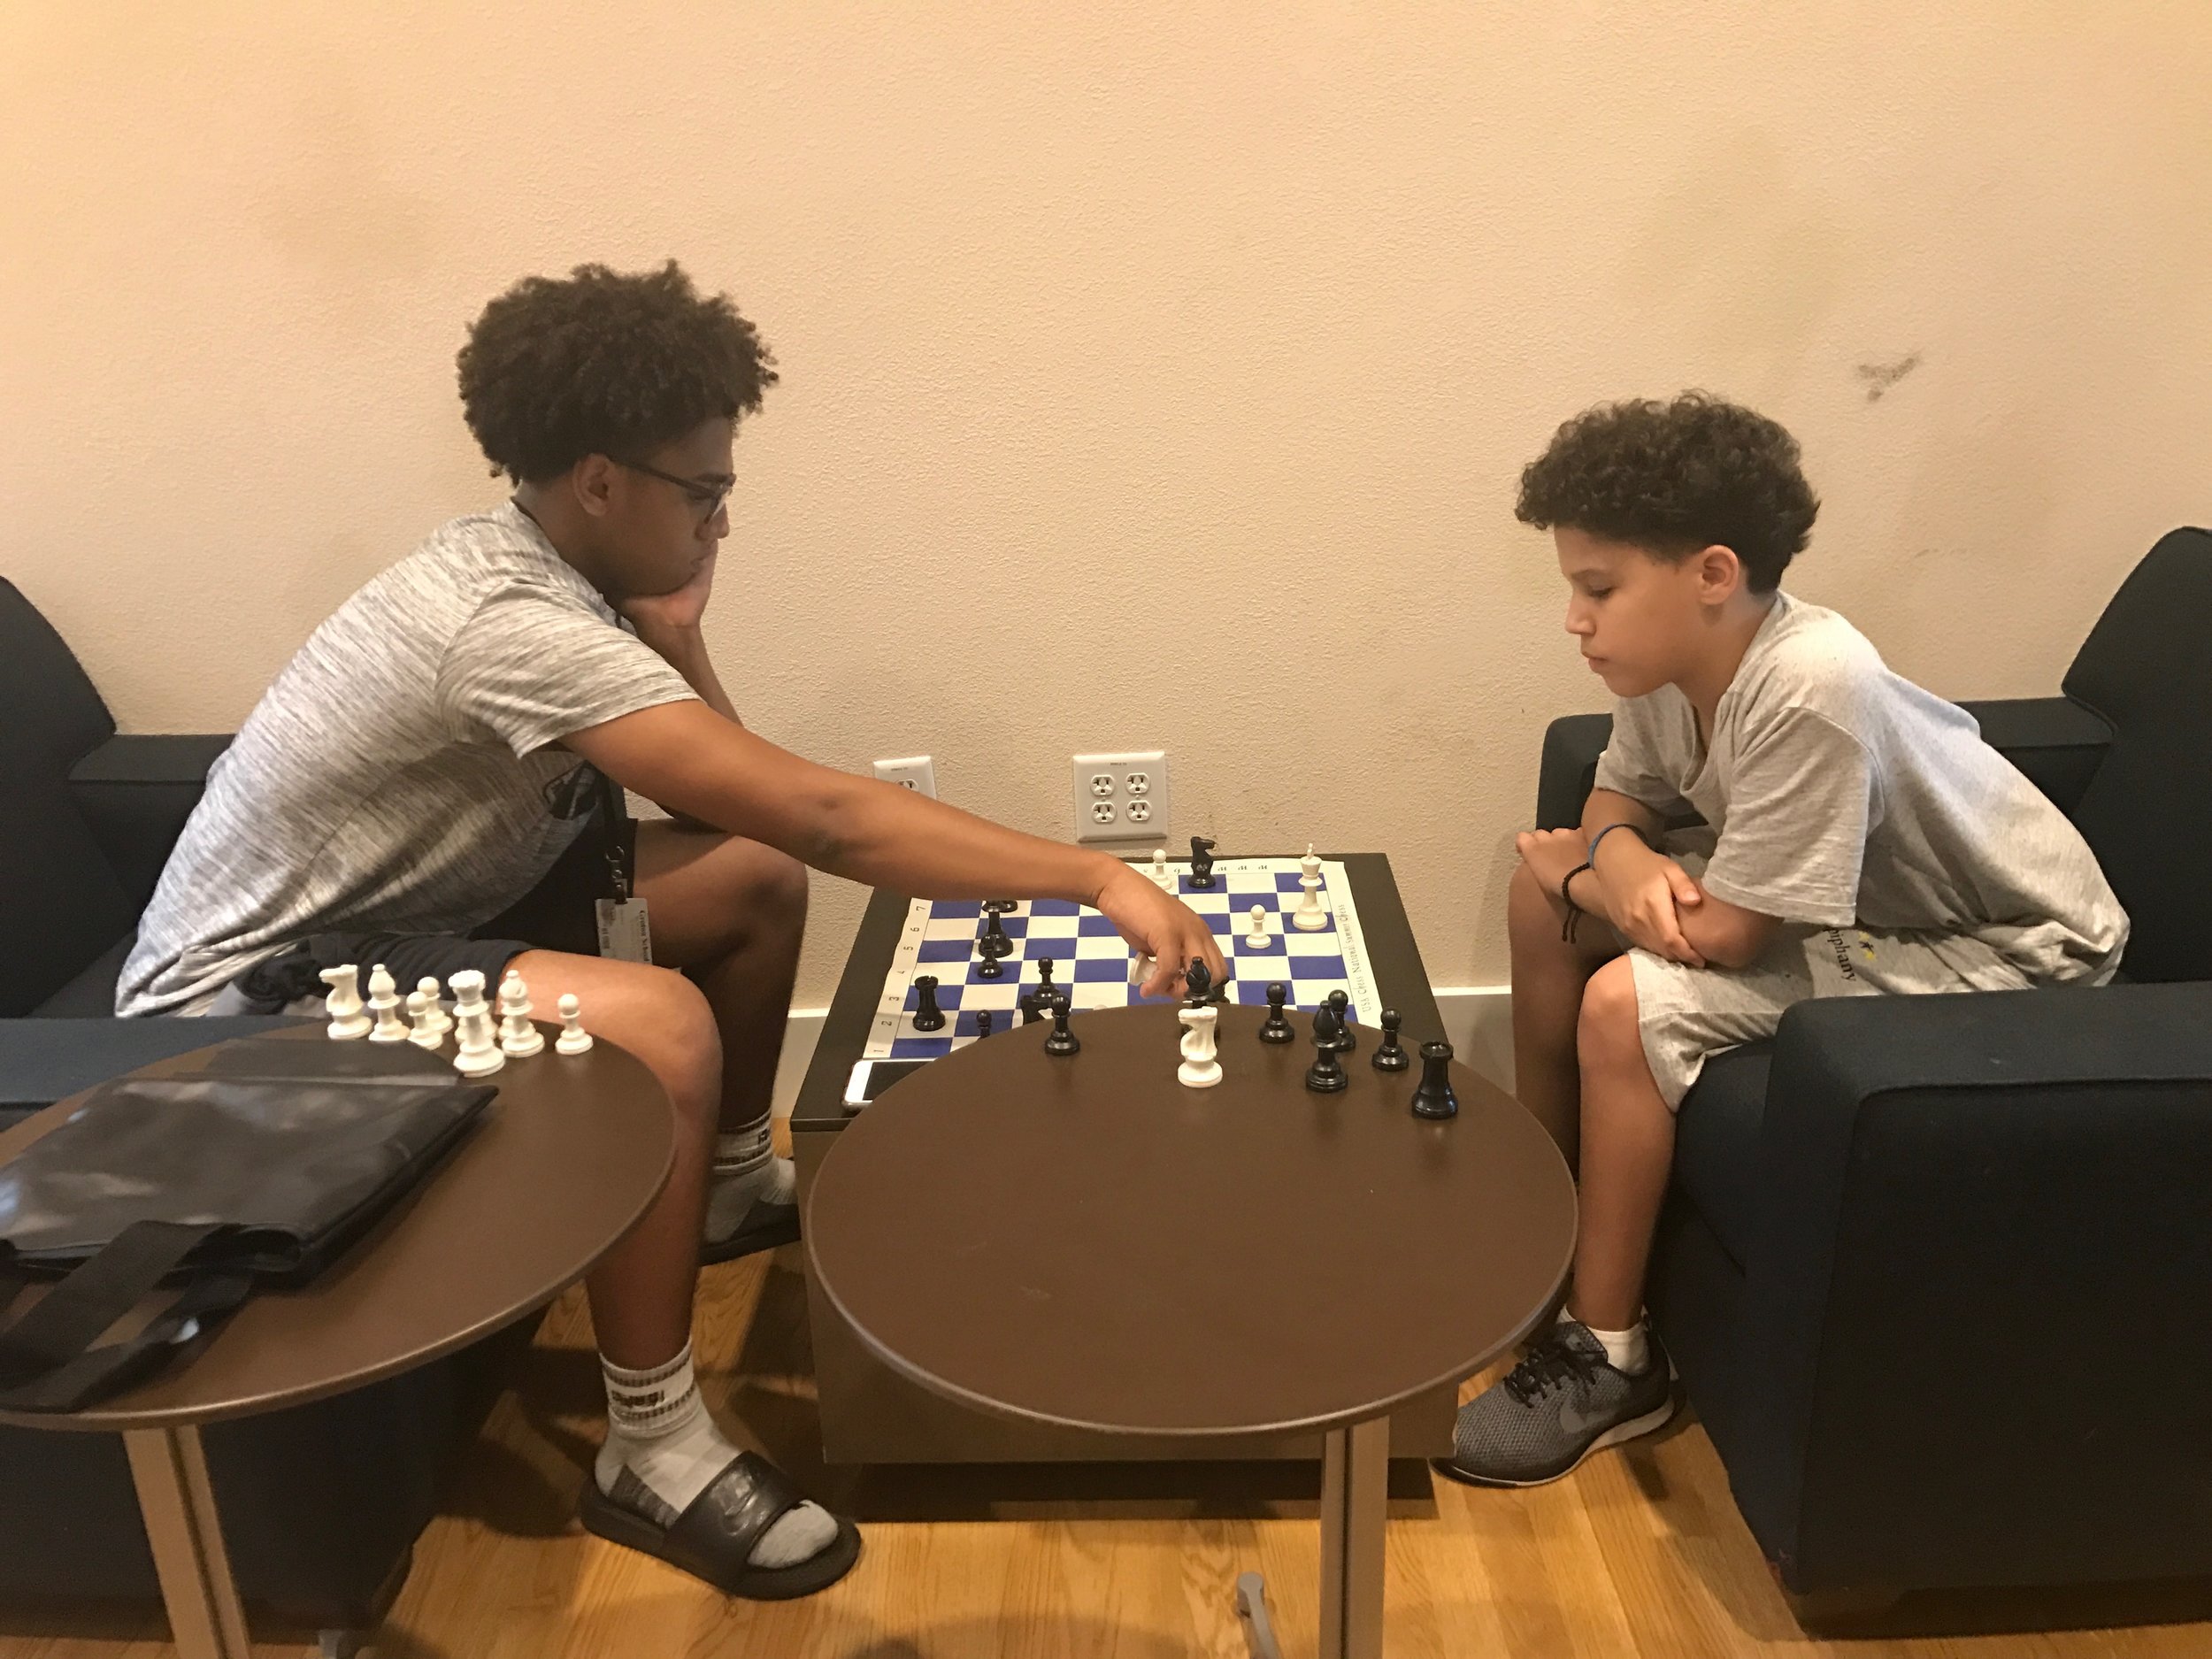   Brathes ‘17 and ChrisAngel playing chess  